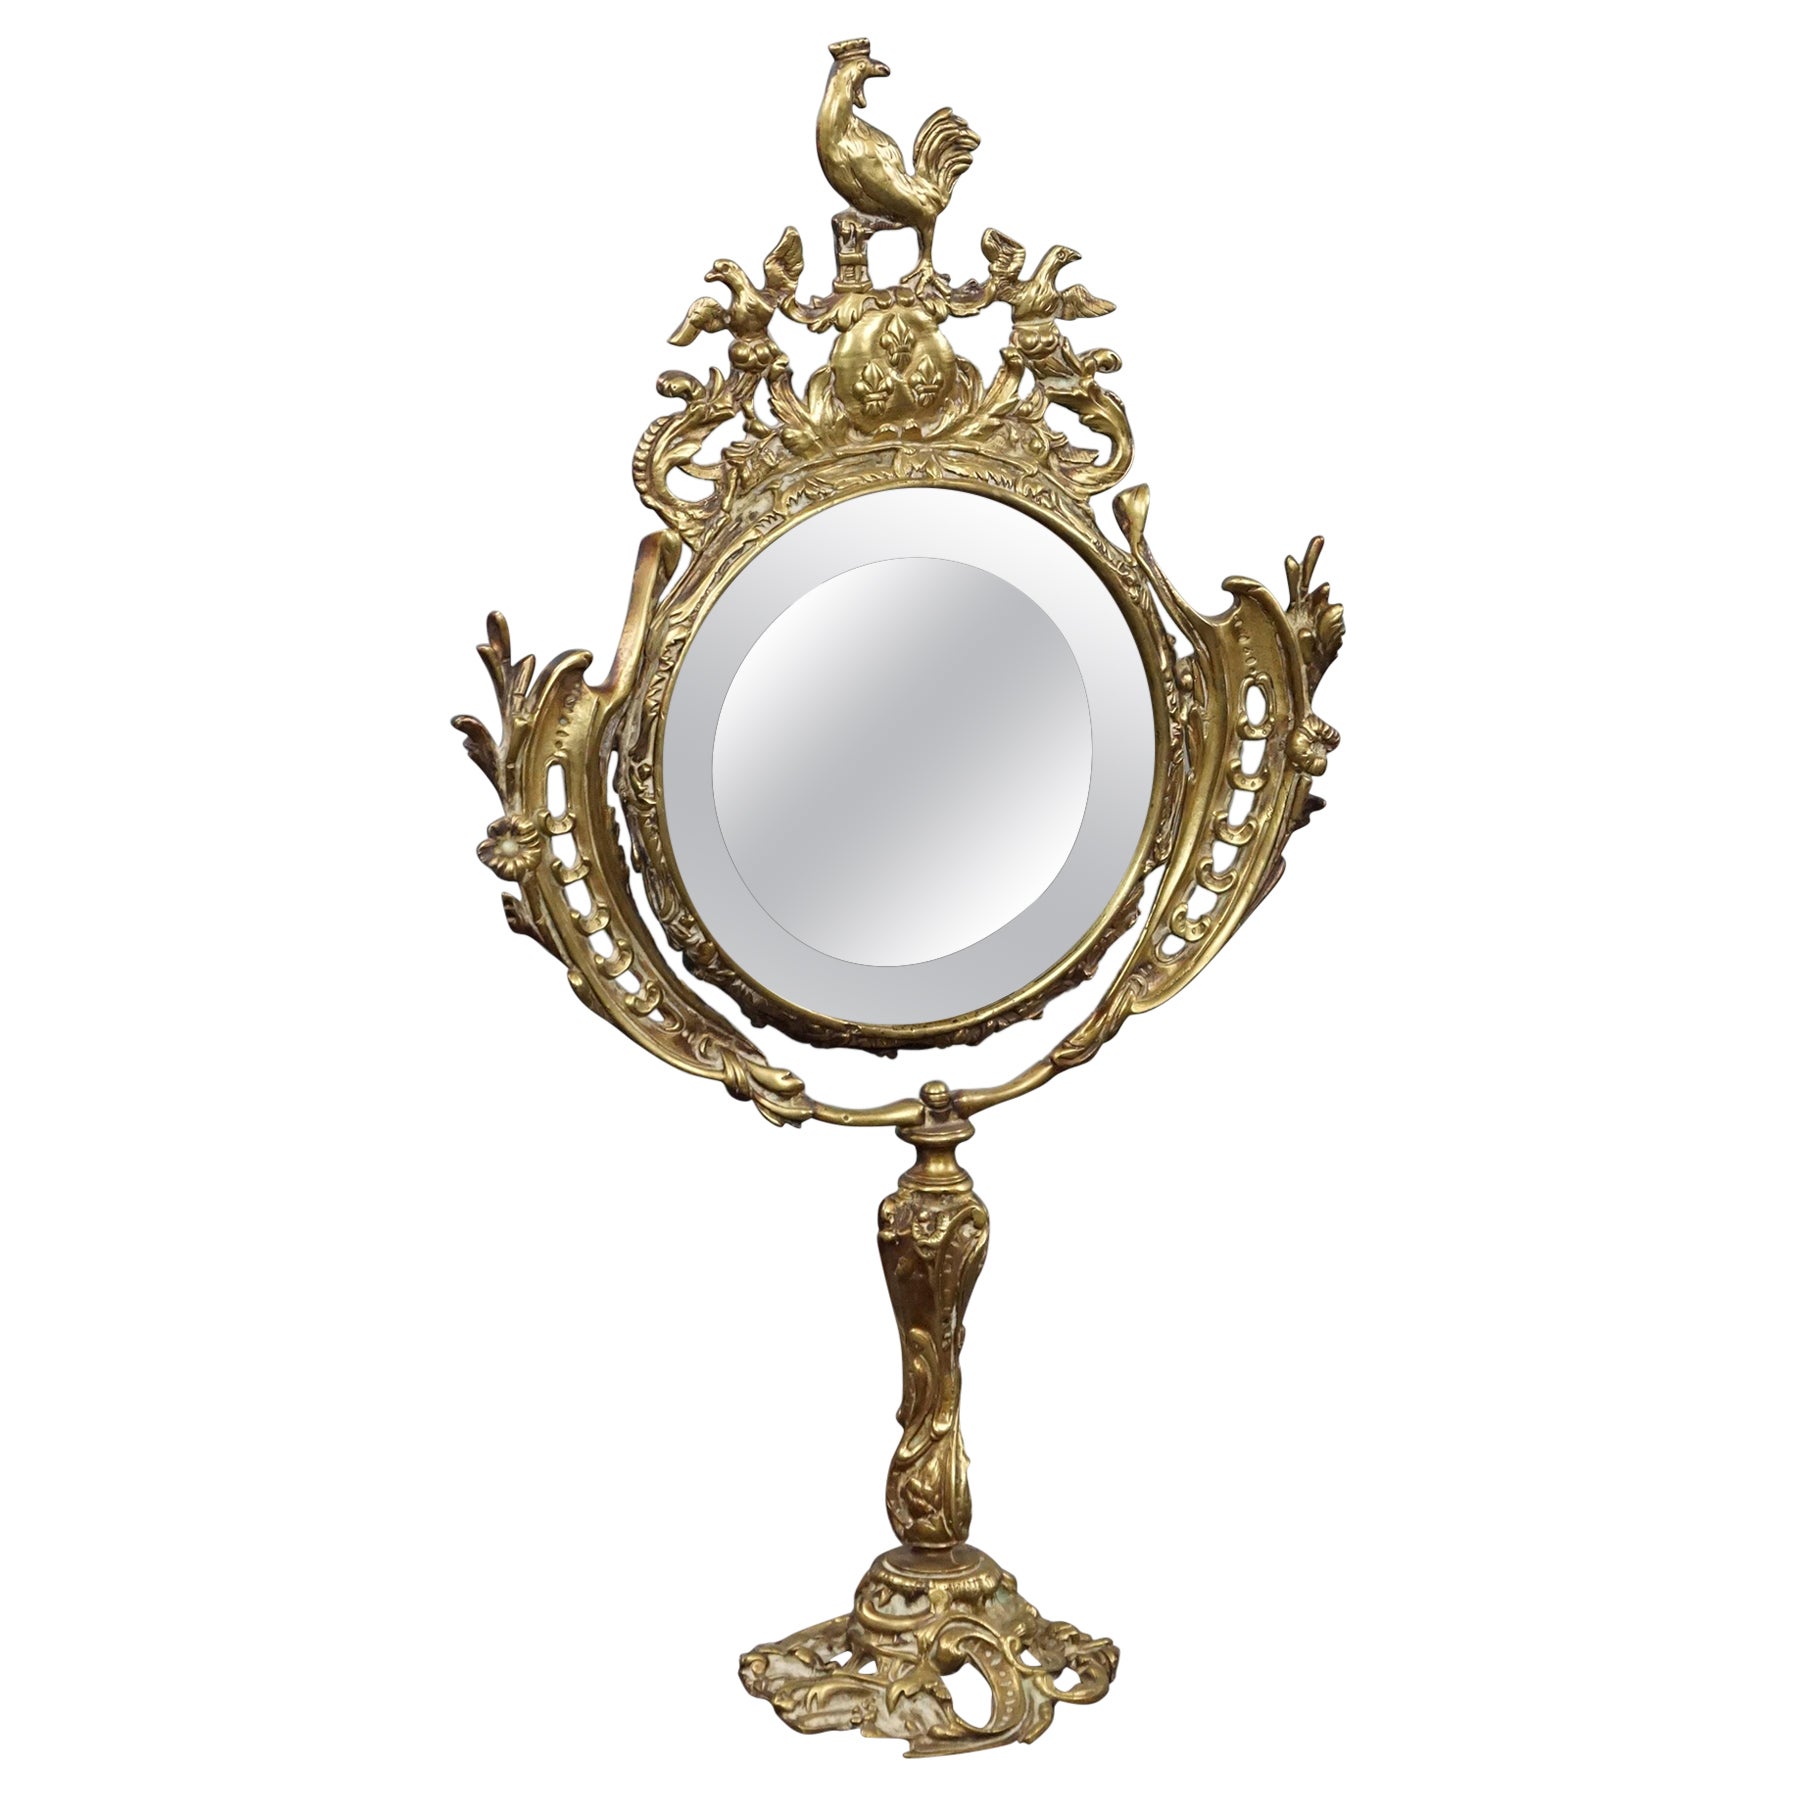 Gold-colored antique dressing table/mirror from France